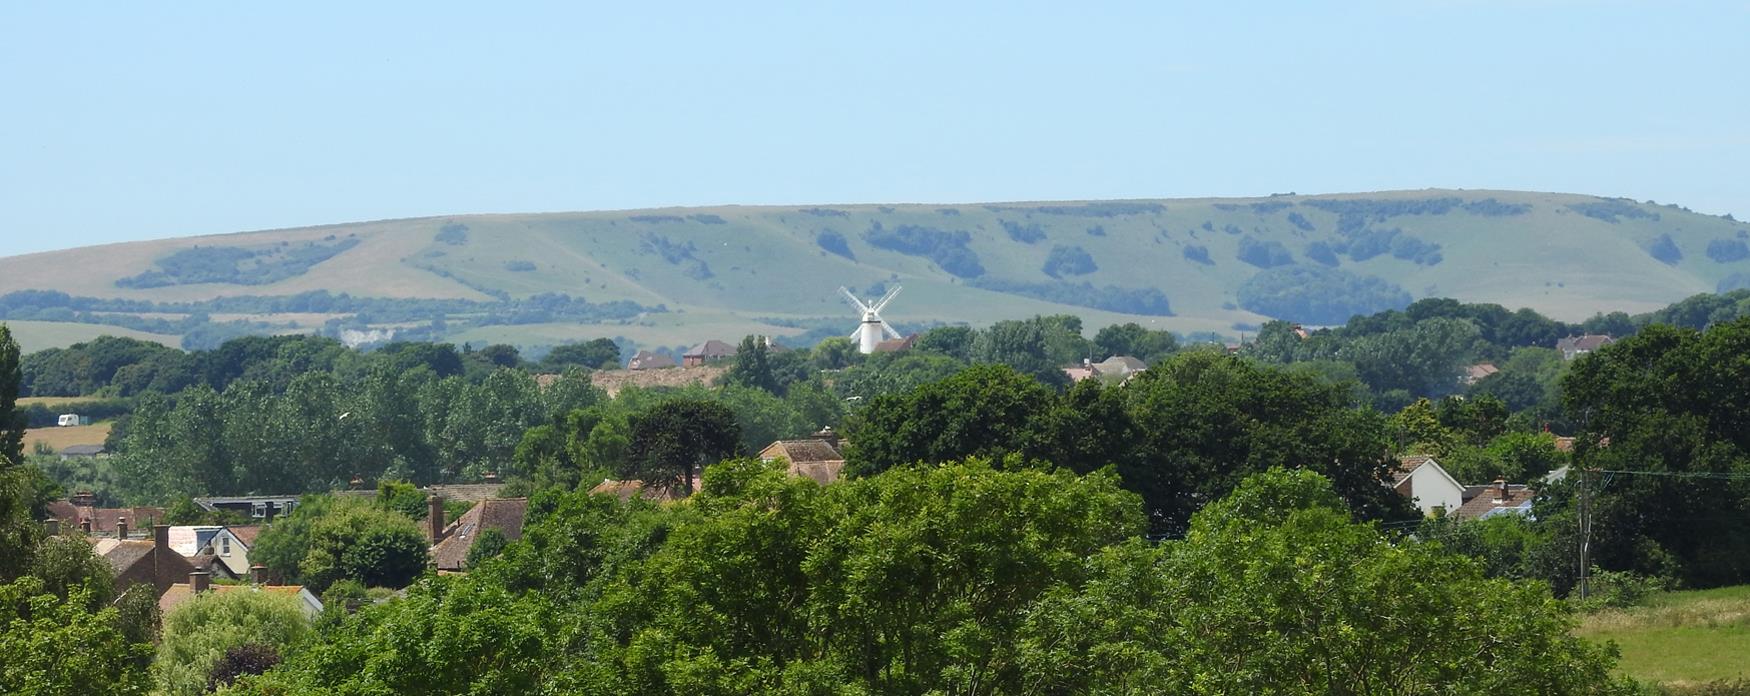 polegate windmill in the distance surrounded by green trees and rolling green fields